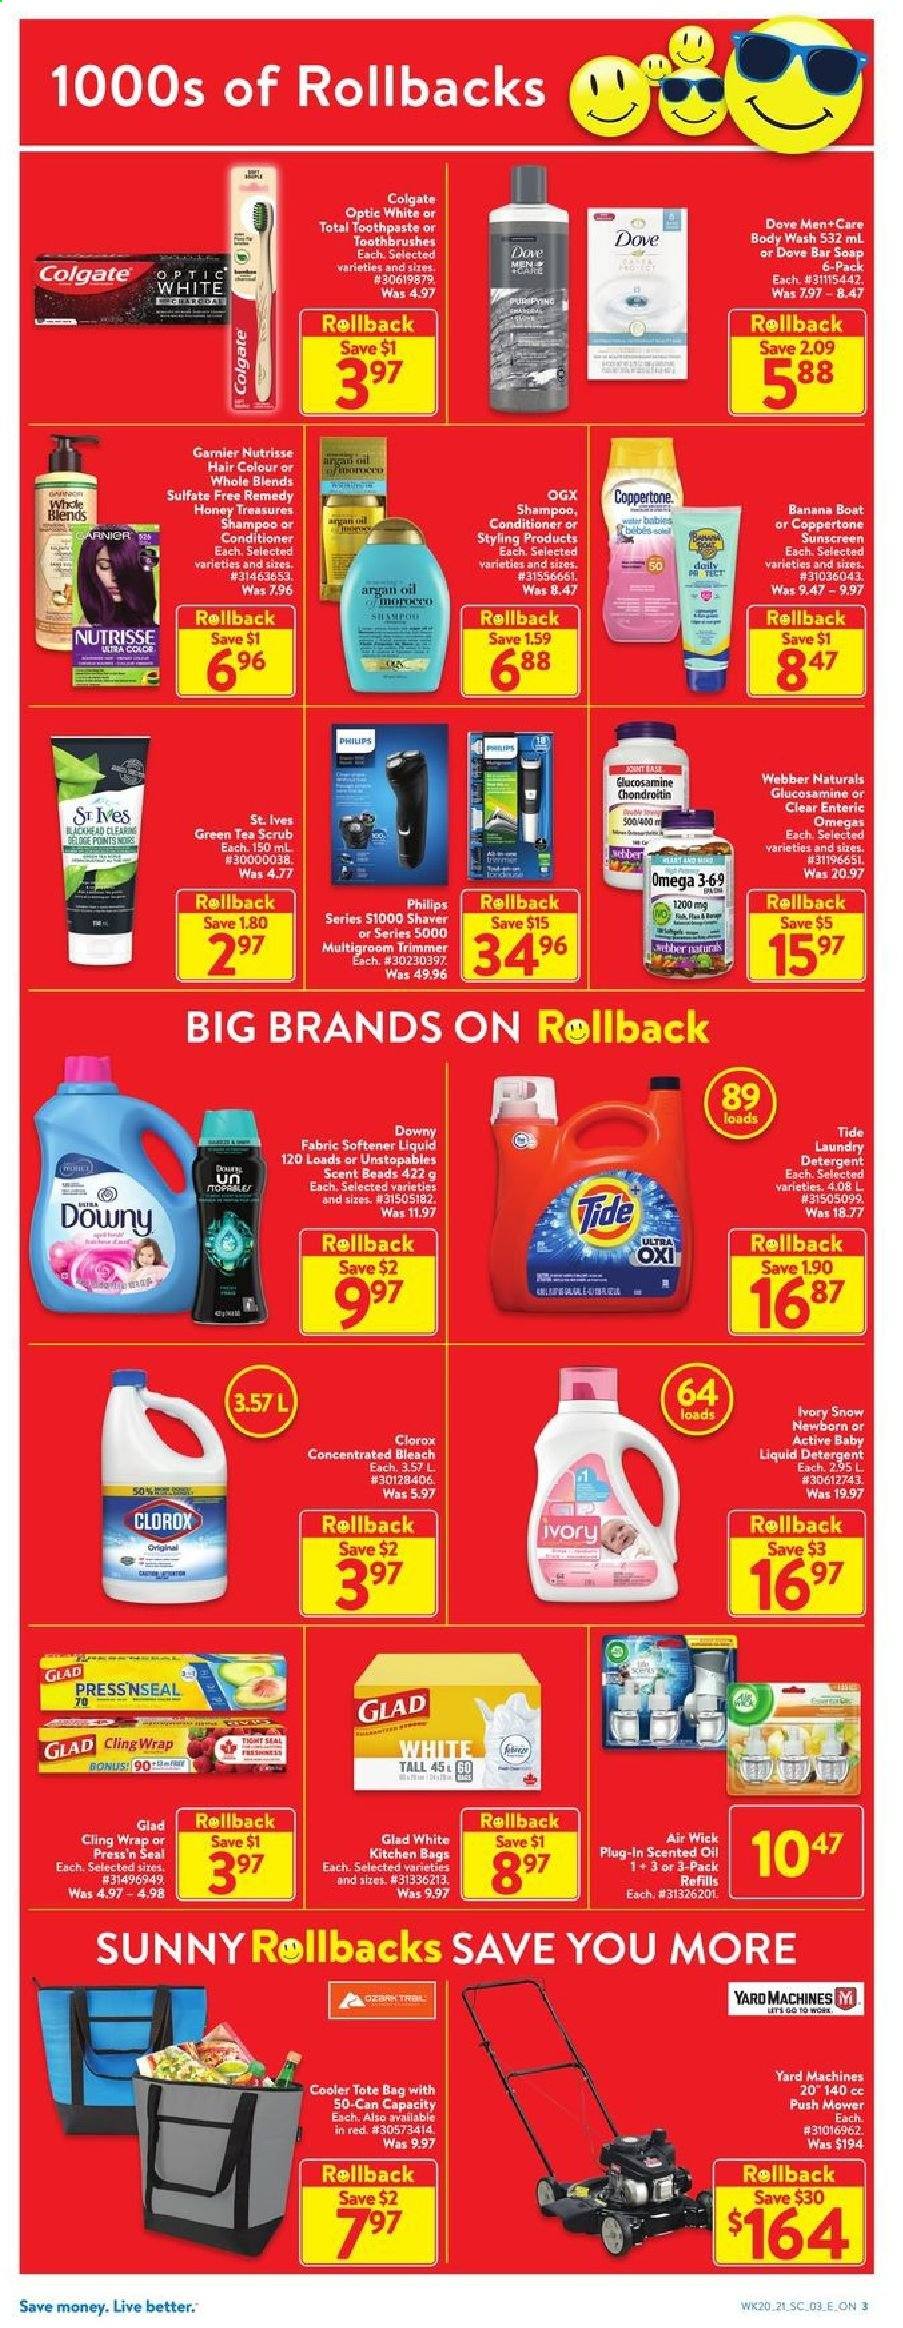 thumbnail - Walmart Flyer - June 10, 2021 - June 16, 2021 - Sales products - honey, green tea, tea, bleach, Clorox, Tide, Unstopables, fabric softener, liquid detergent, laundry detergent, Downy Laundry, body wash, soap bar, soap, toothpaste, OGX, conditioner, hair color, Yard, shaver, bag, trimmer, Air Wick, scented oil, tote, tote bag, boat, glucosamine, Omega-3, argan oil, Garnier, shampoo. Page 3.